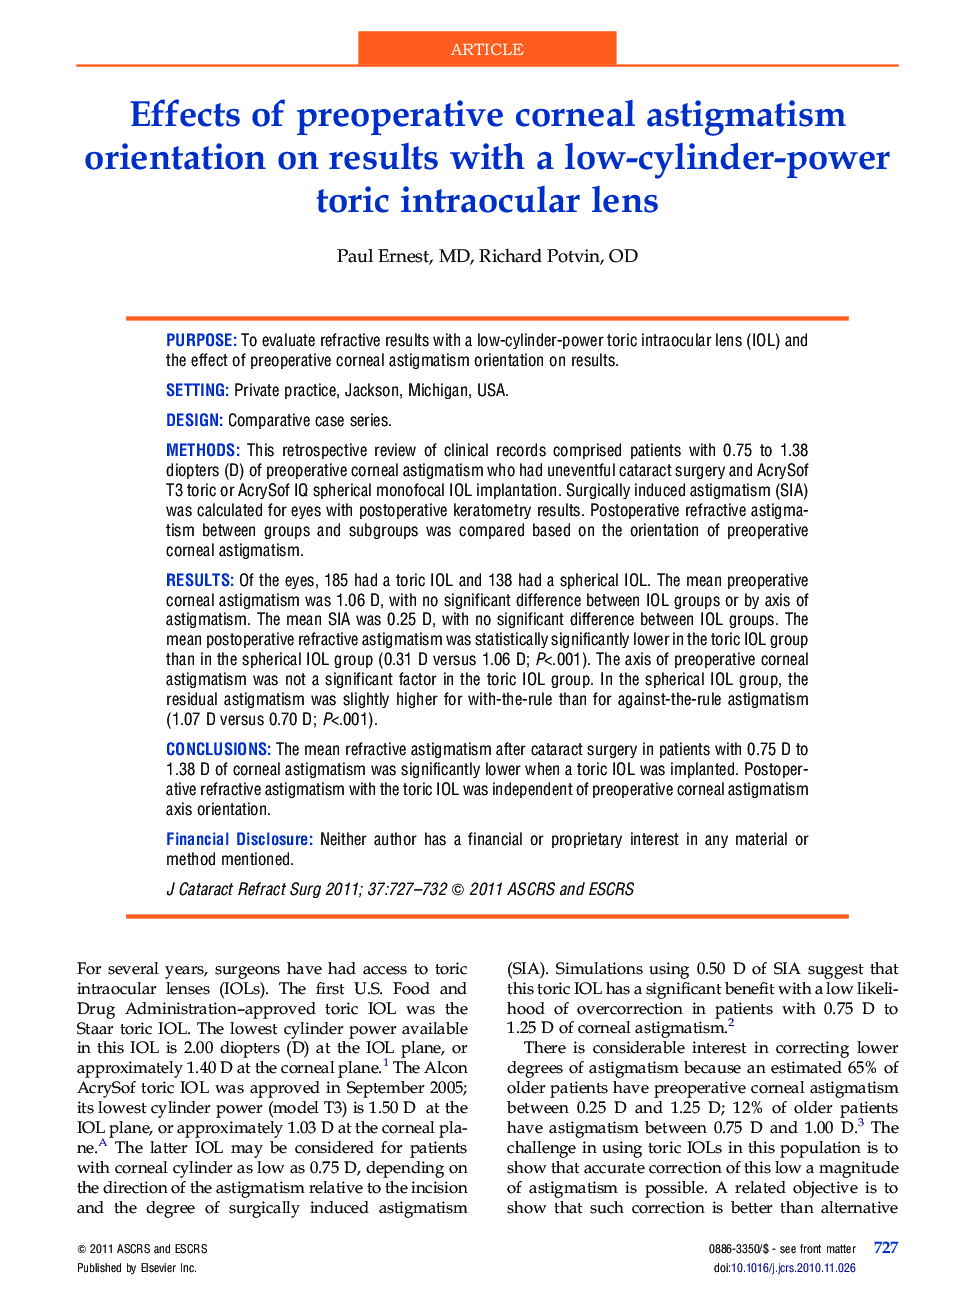 Effects of preoperative corneal astigmatism orientation on results with a low-cylinder-power toric intraocular lens 